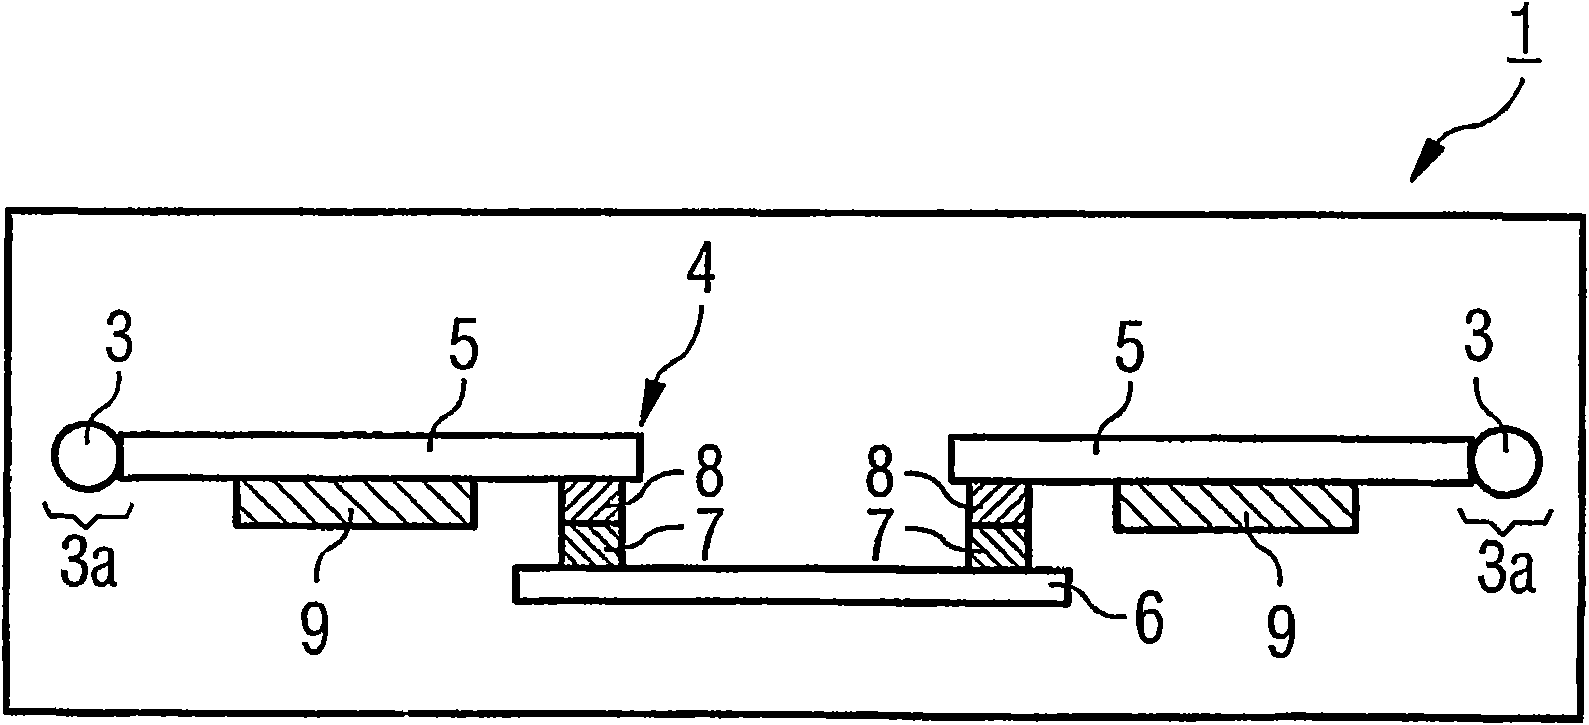 Electric switching device